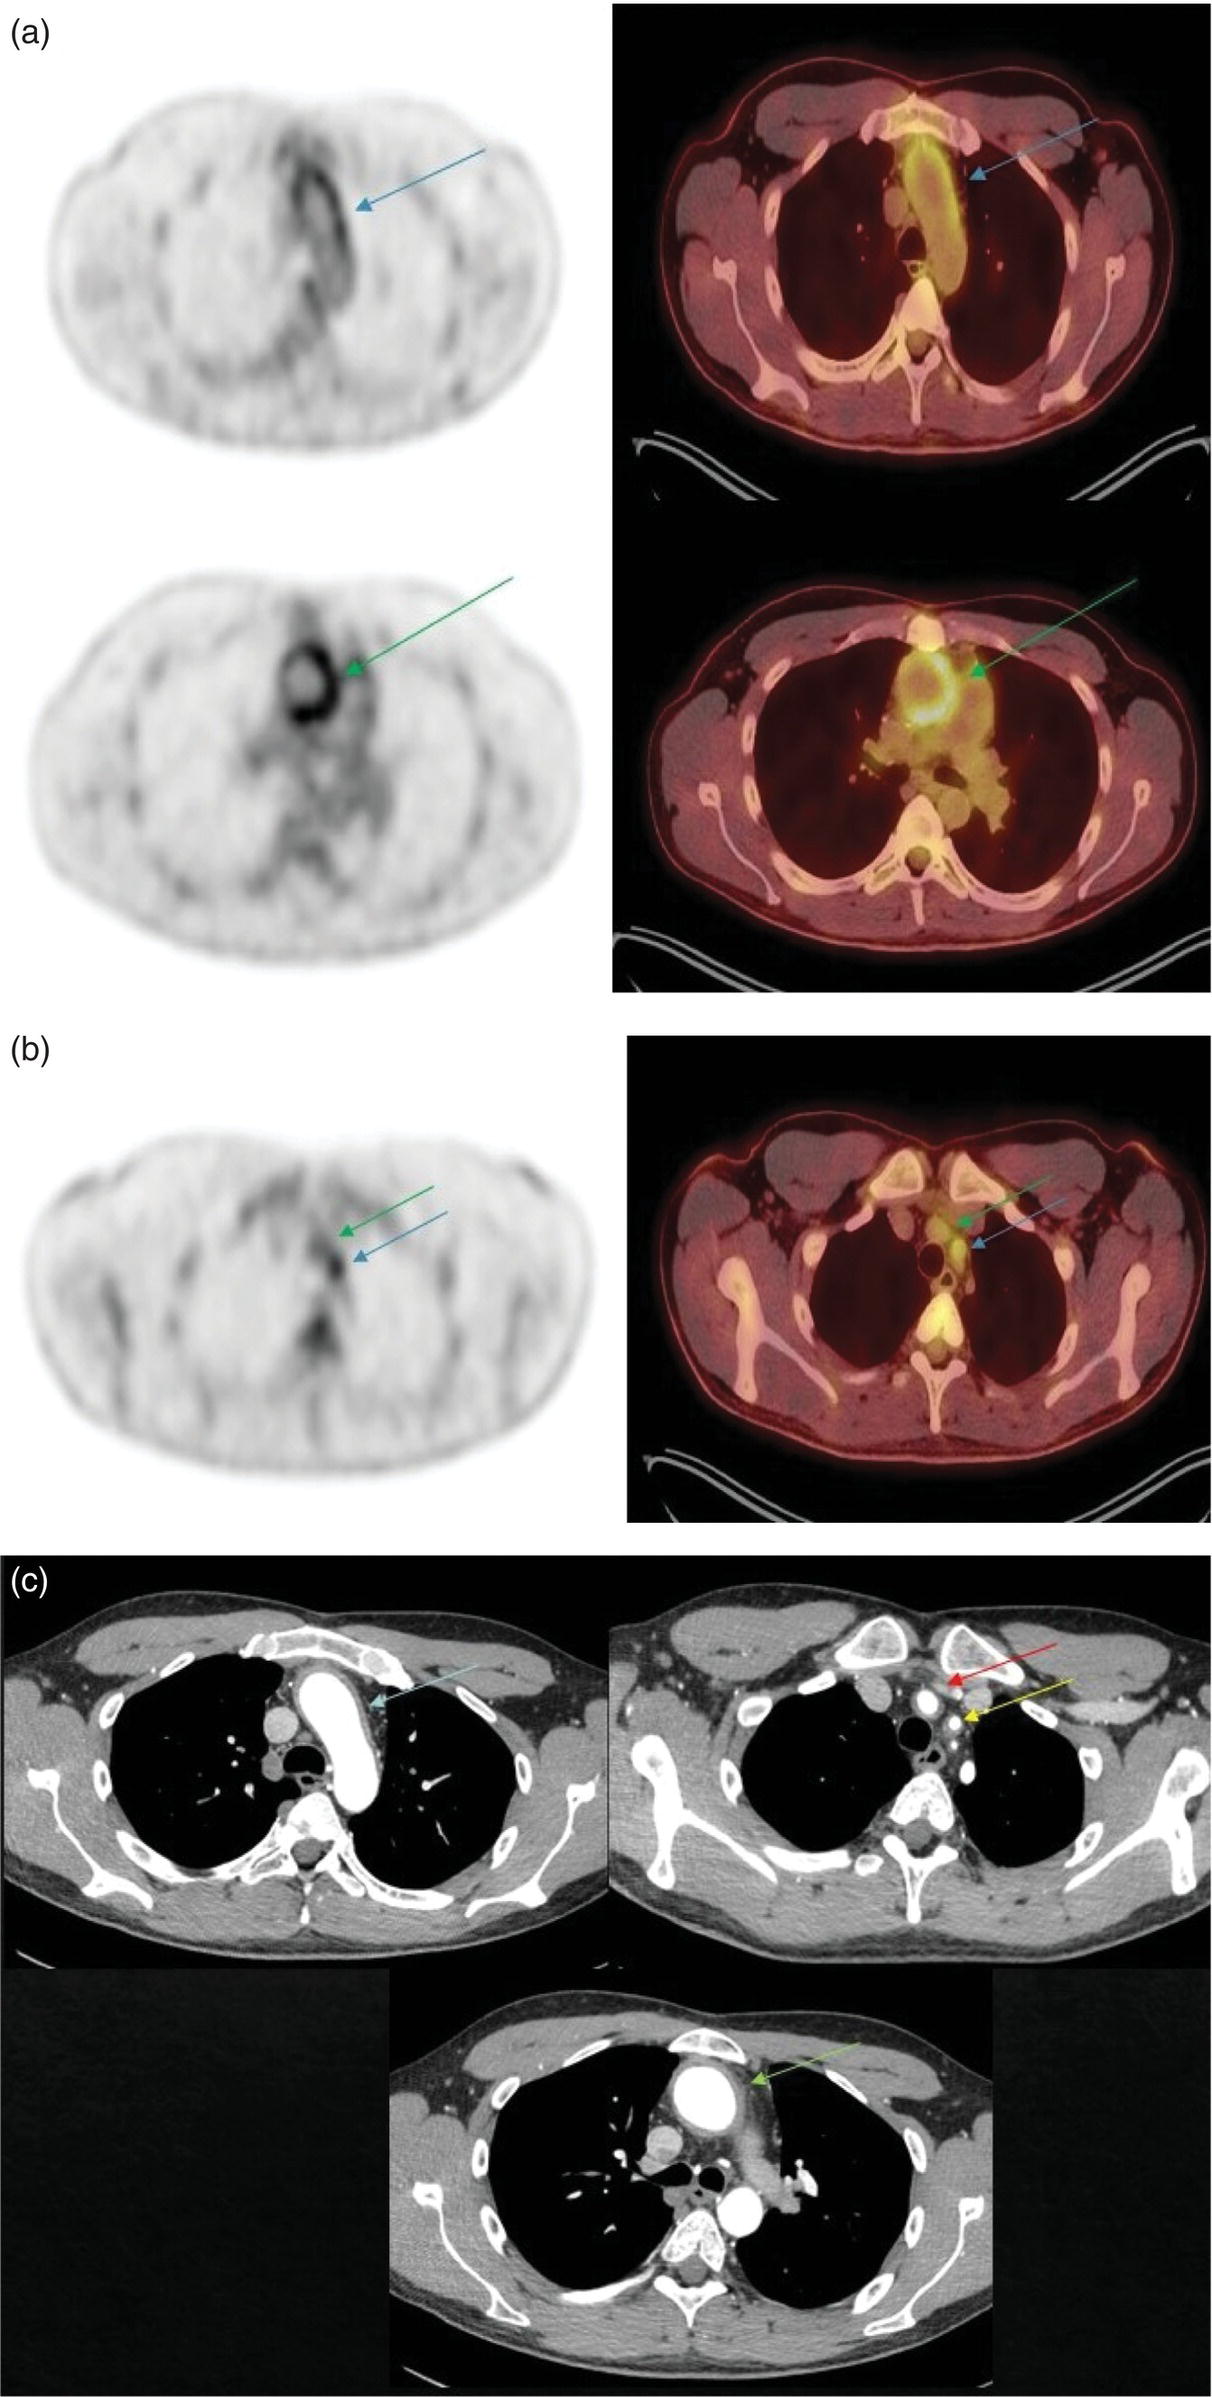 Schematic illustration of (A) axial PET and fused PET/CT images for a 34-year-old male patient with history of large vessel vasculitis of the aorta externally compressing the coronary ostia showing diffusely increased mural uptake in the anterior aortic arch (blue arrows) and ascending aorta (green arrows). (B) Axial PET and fused PET/CT images showing increased mural uptake in the proximal left common carotid artery (blue arrows) and to a lesser extent the proximal innominate artery (green arrows). (C) Axial CT angiography images of the same patient demonstrating diffuse wall thickening of the aortic arch (blue arrow), ascending aorta (green arrow), proximal left common carotid artery (yellow arrow), and proximal left innominate artery (red arrow).